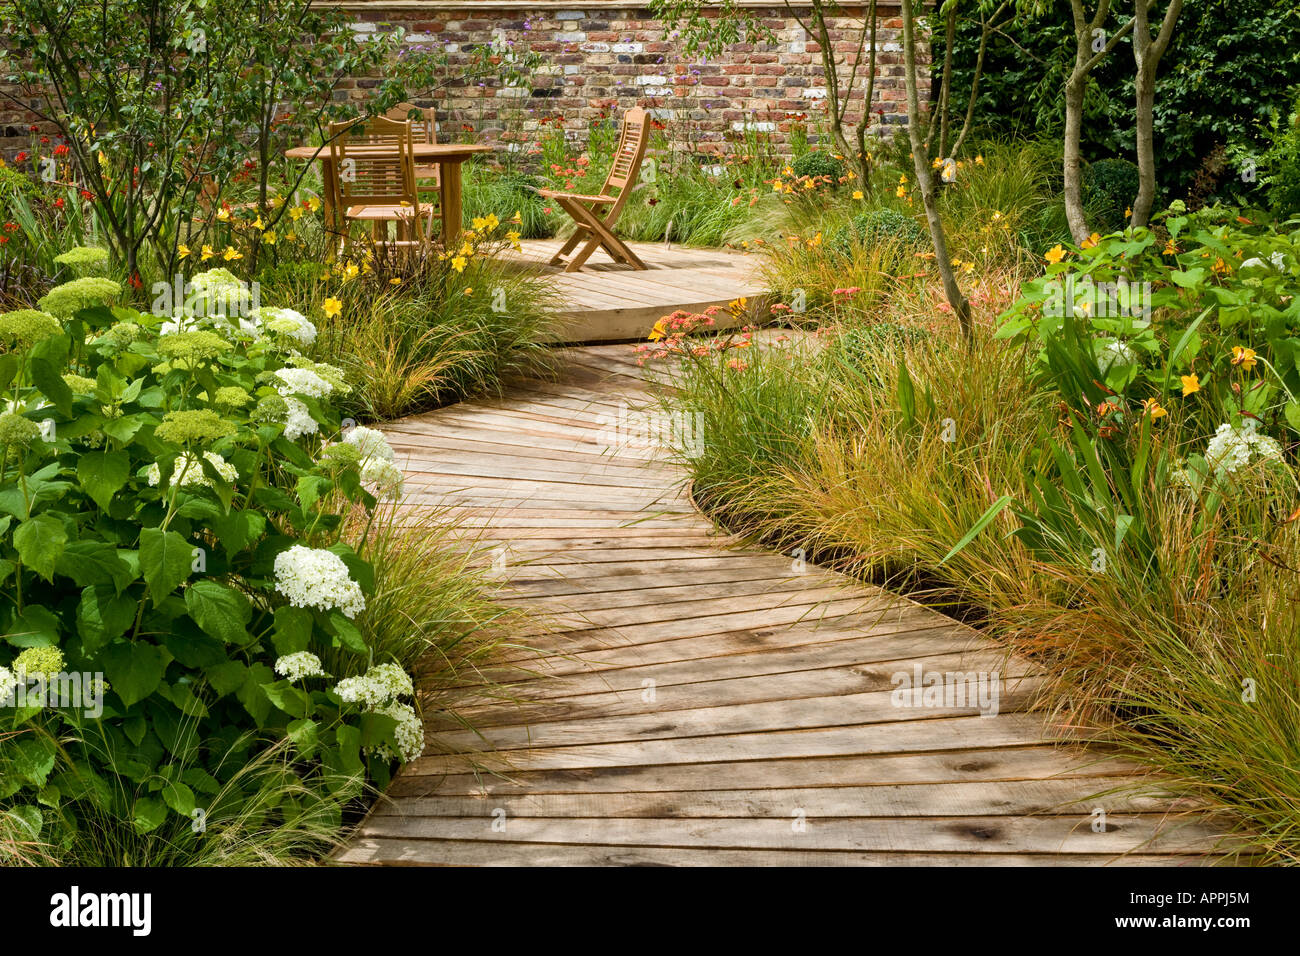 Boardwalk in garden to decking sitting area with table and chairs. Plants include Hydrangea Hemerocallis evergreen grass Stipa Stock Photo